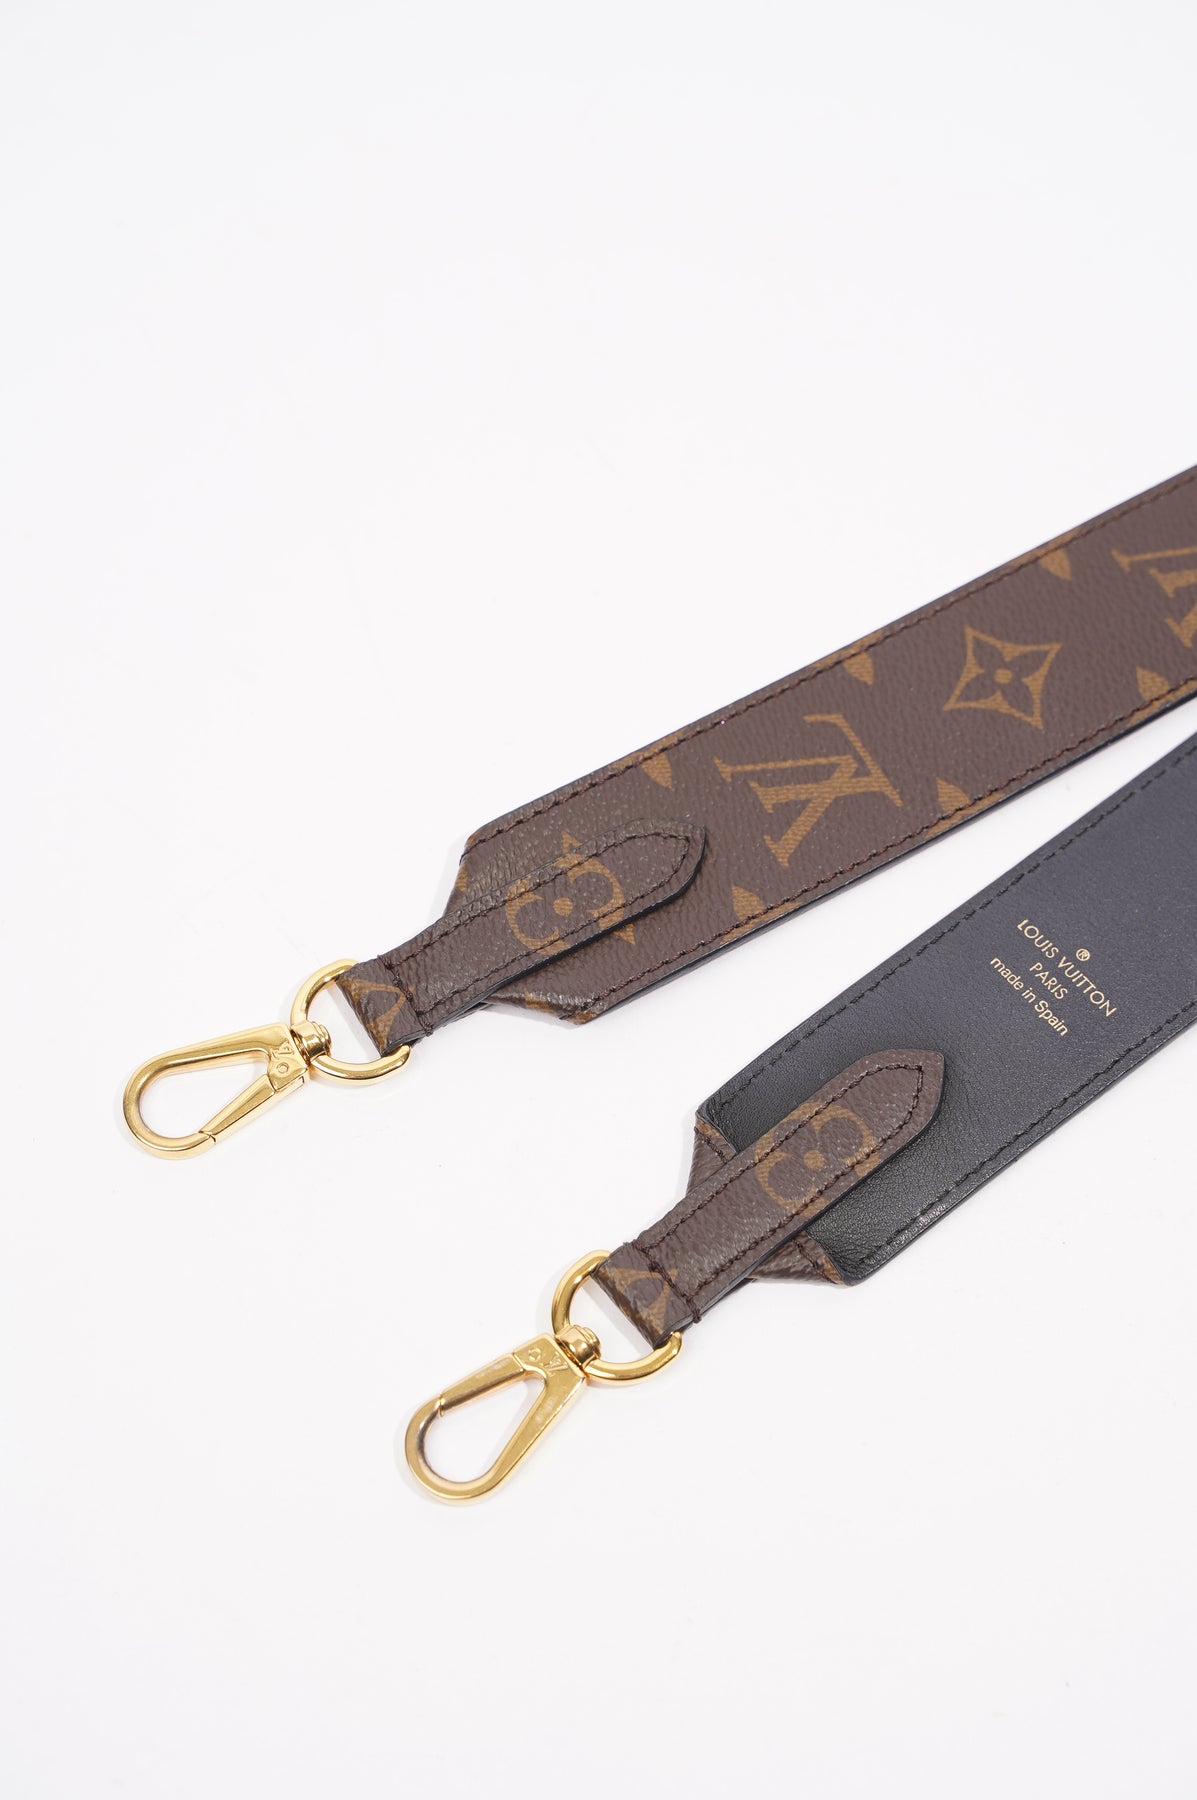 lv.luv.08 (prev lvoe.vnj) on Instagram: “Bandouliere strap with my